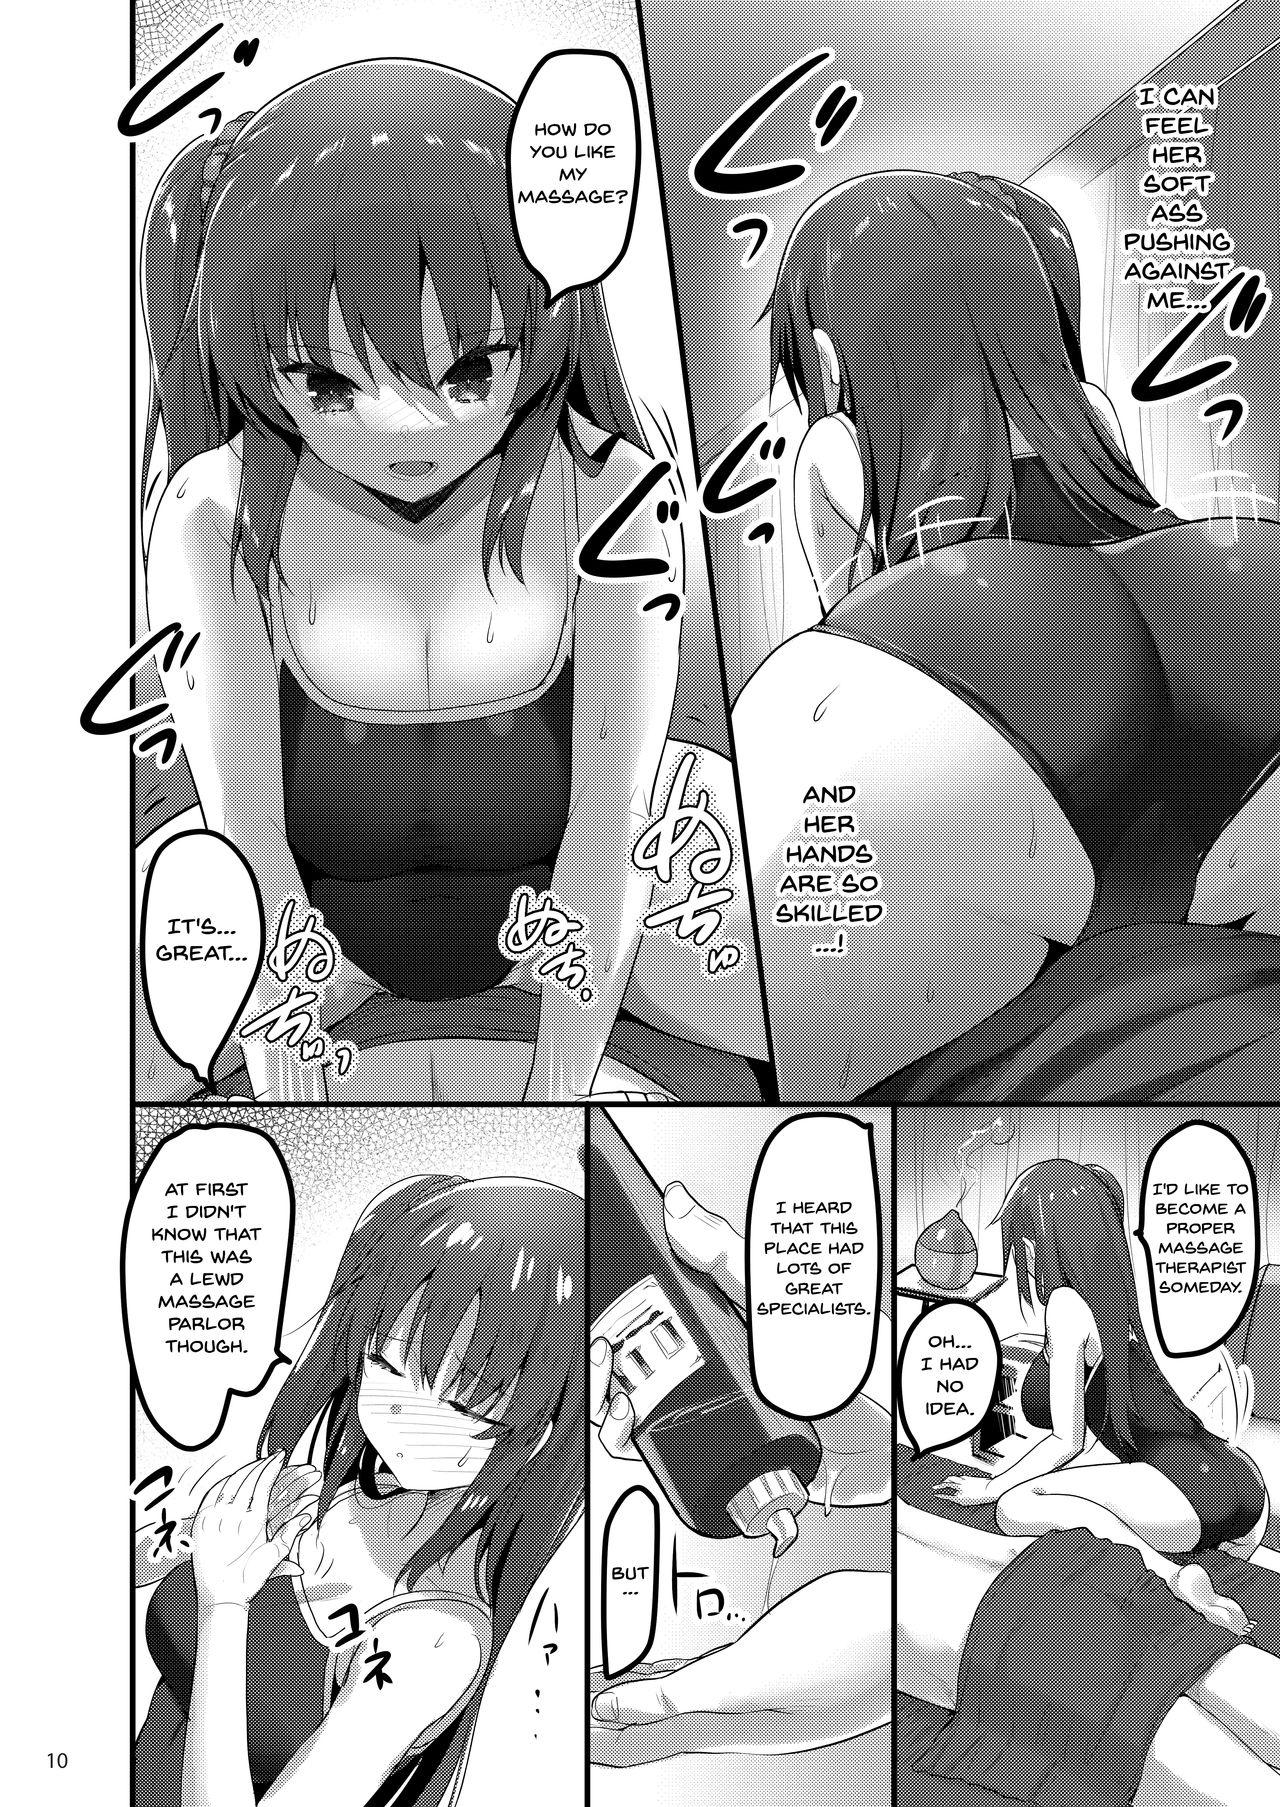 Huge Boobs Ecchi na Massage-ya ni Kitara Classmate ga Dete Kita Hanashi | A Story Of Going Out To Get a Massage And The One Who Shows Up Is My Classmate - Original Hot Women Having Sex - Page 9